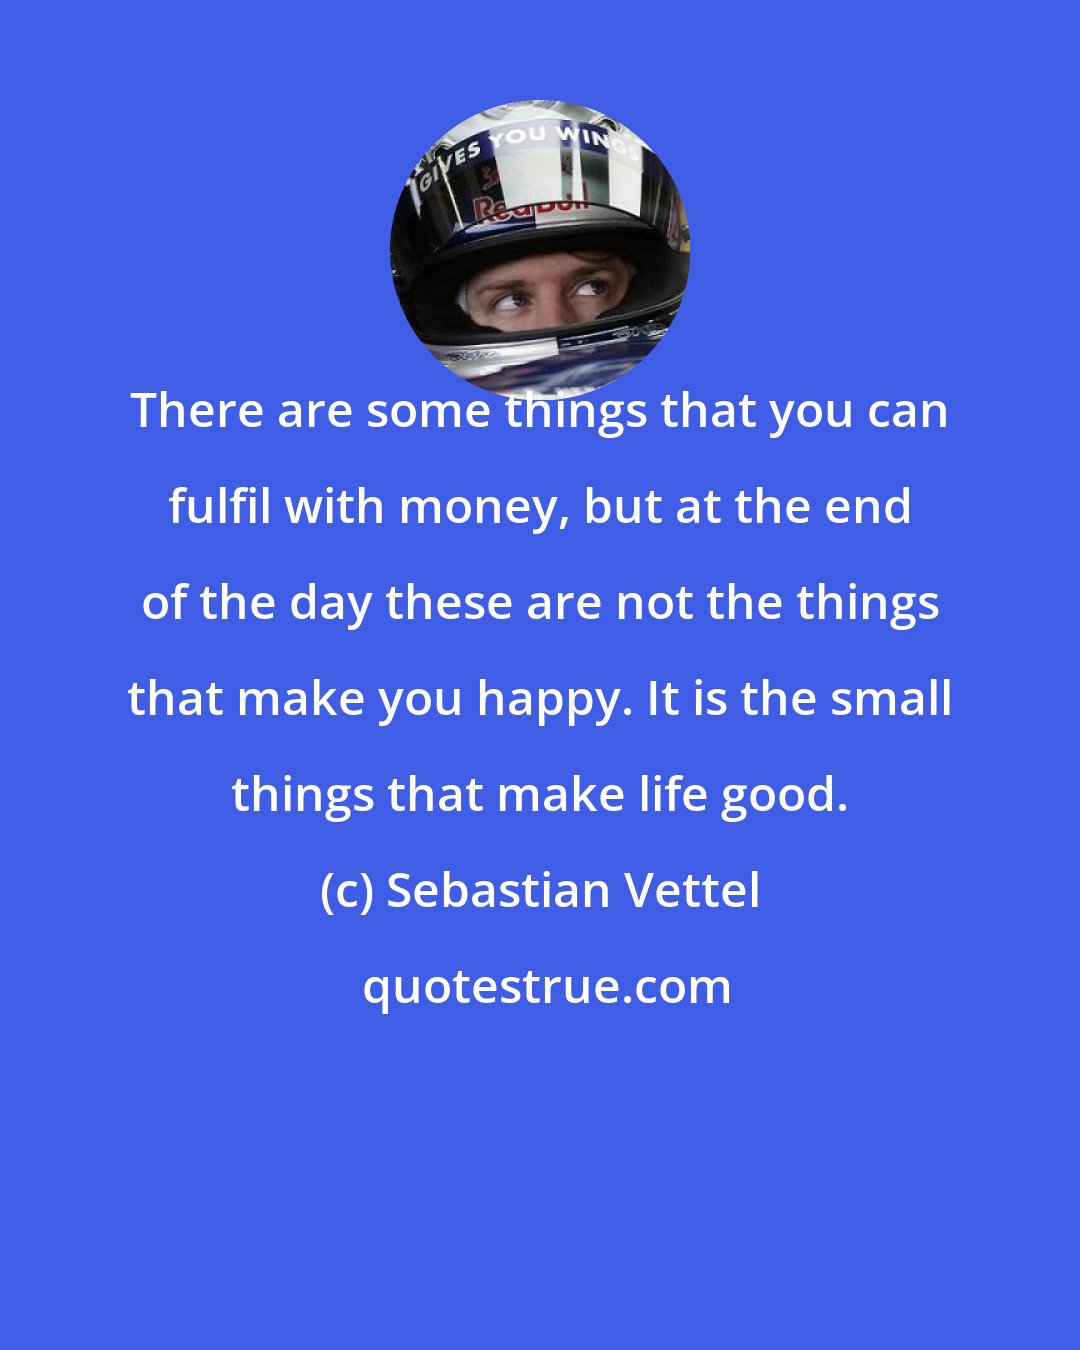 Sebastian Vettel: There are some things that you can fulfil with money, but at the end of the day these are not the things that make you happy. It is the small things that make life good.